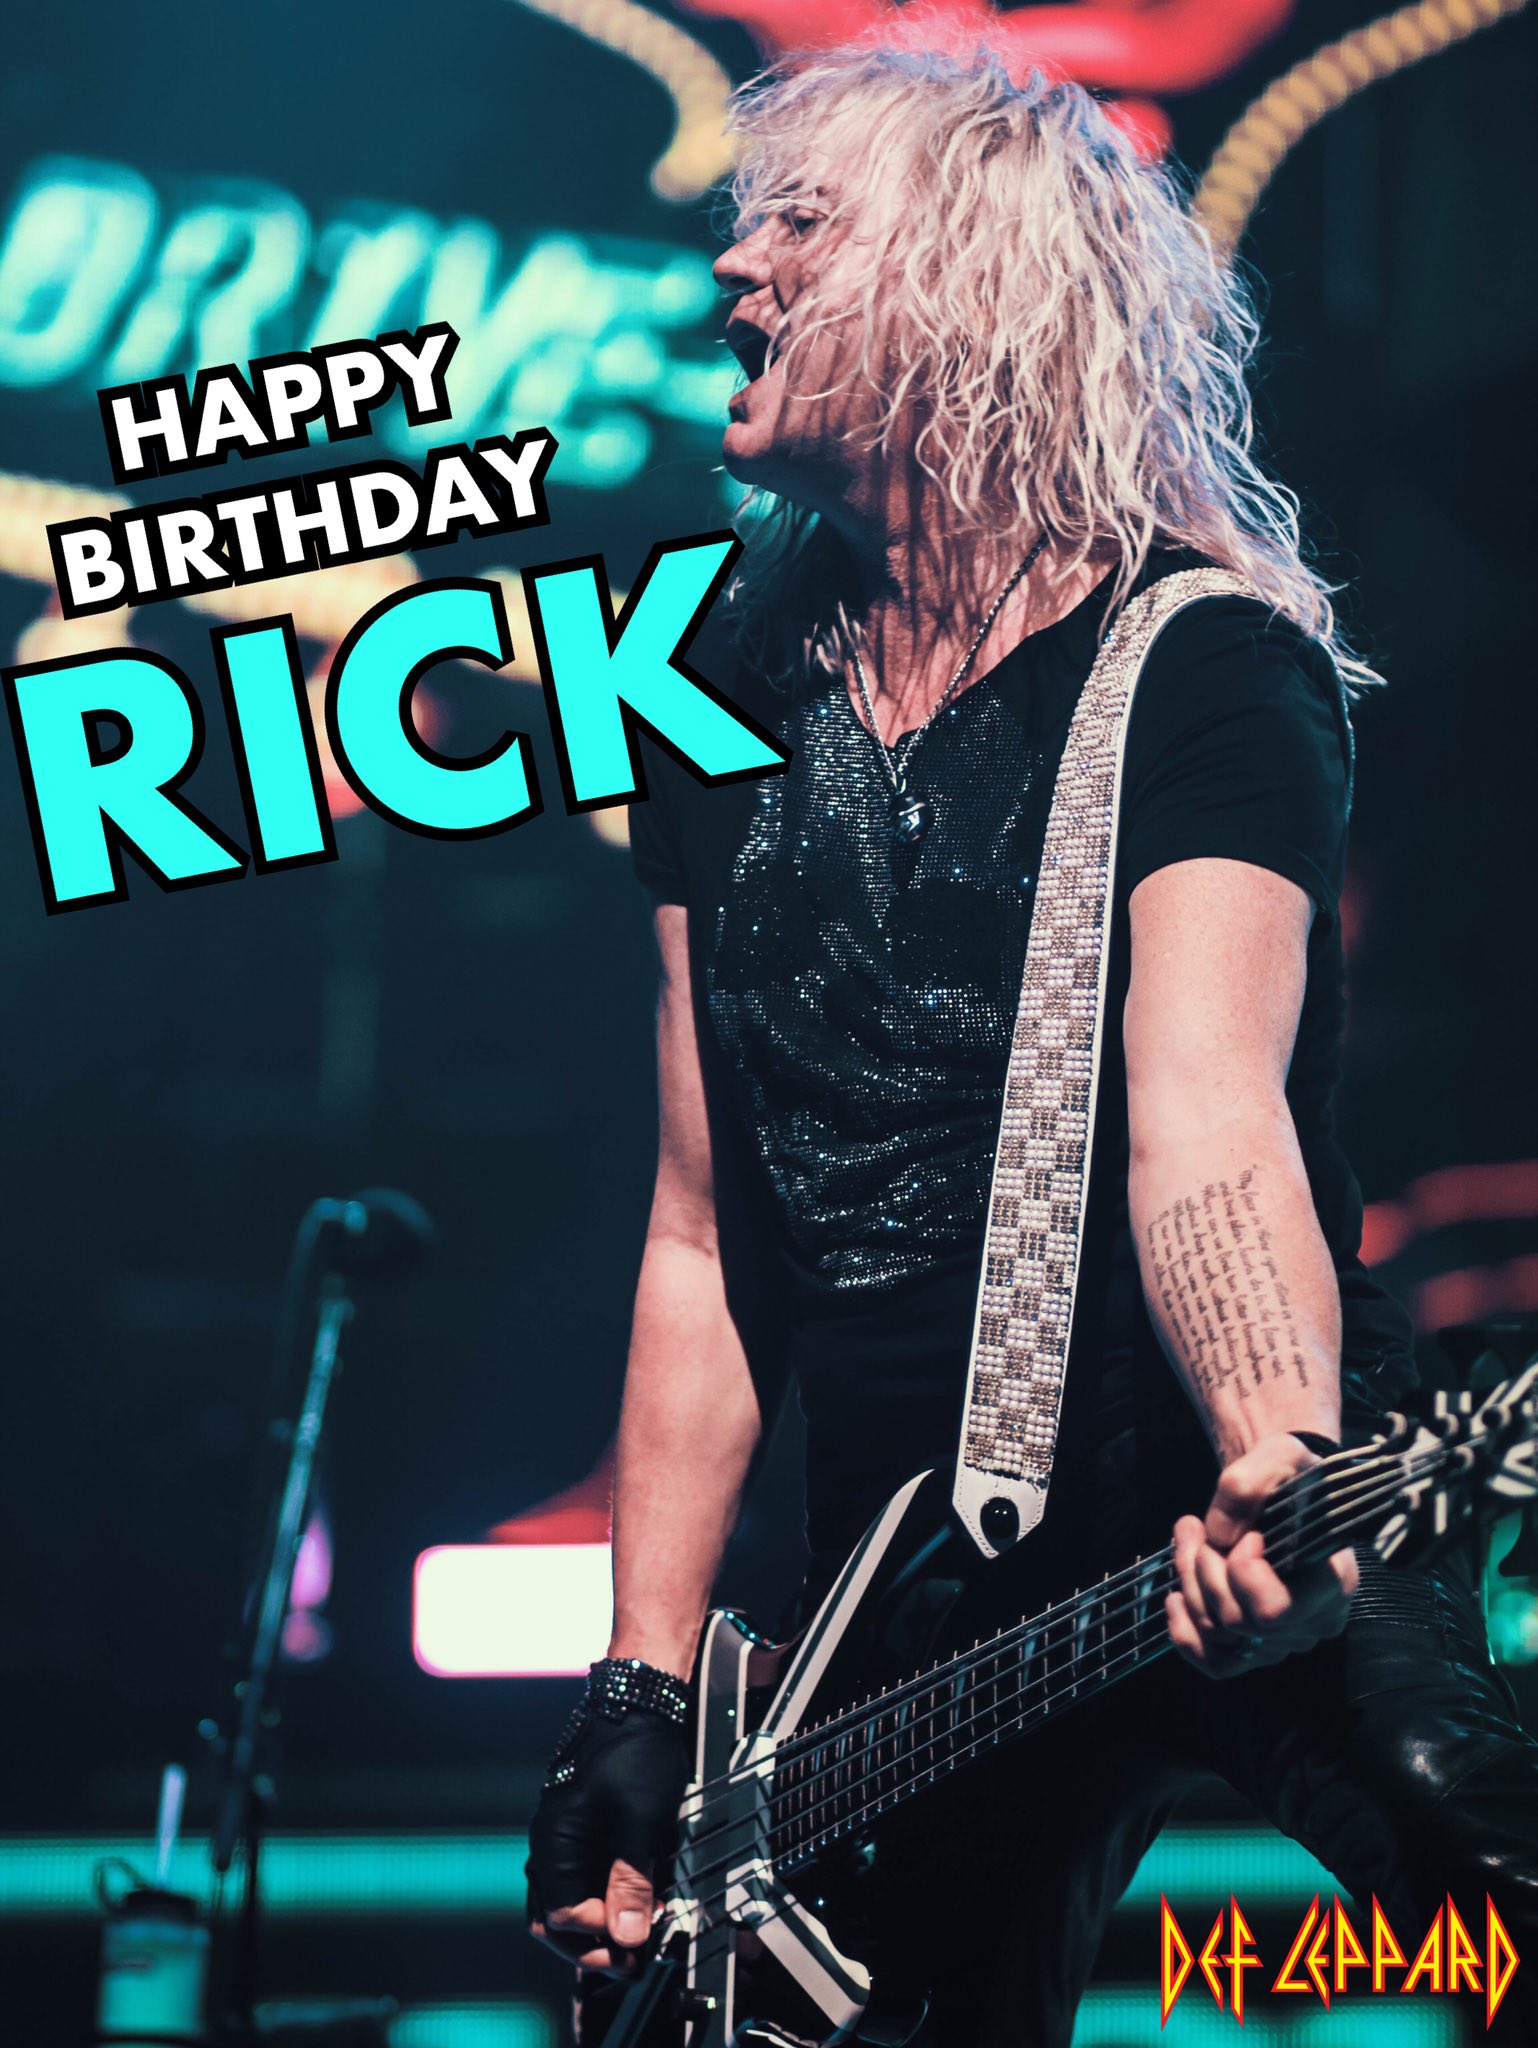 Wishing Rick Savage a very happy birthday today! Comment below & send him some love. 